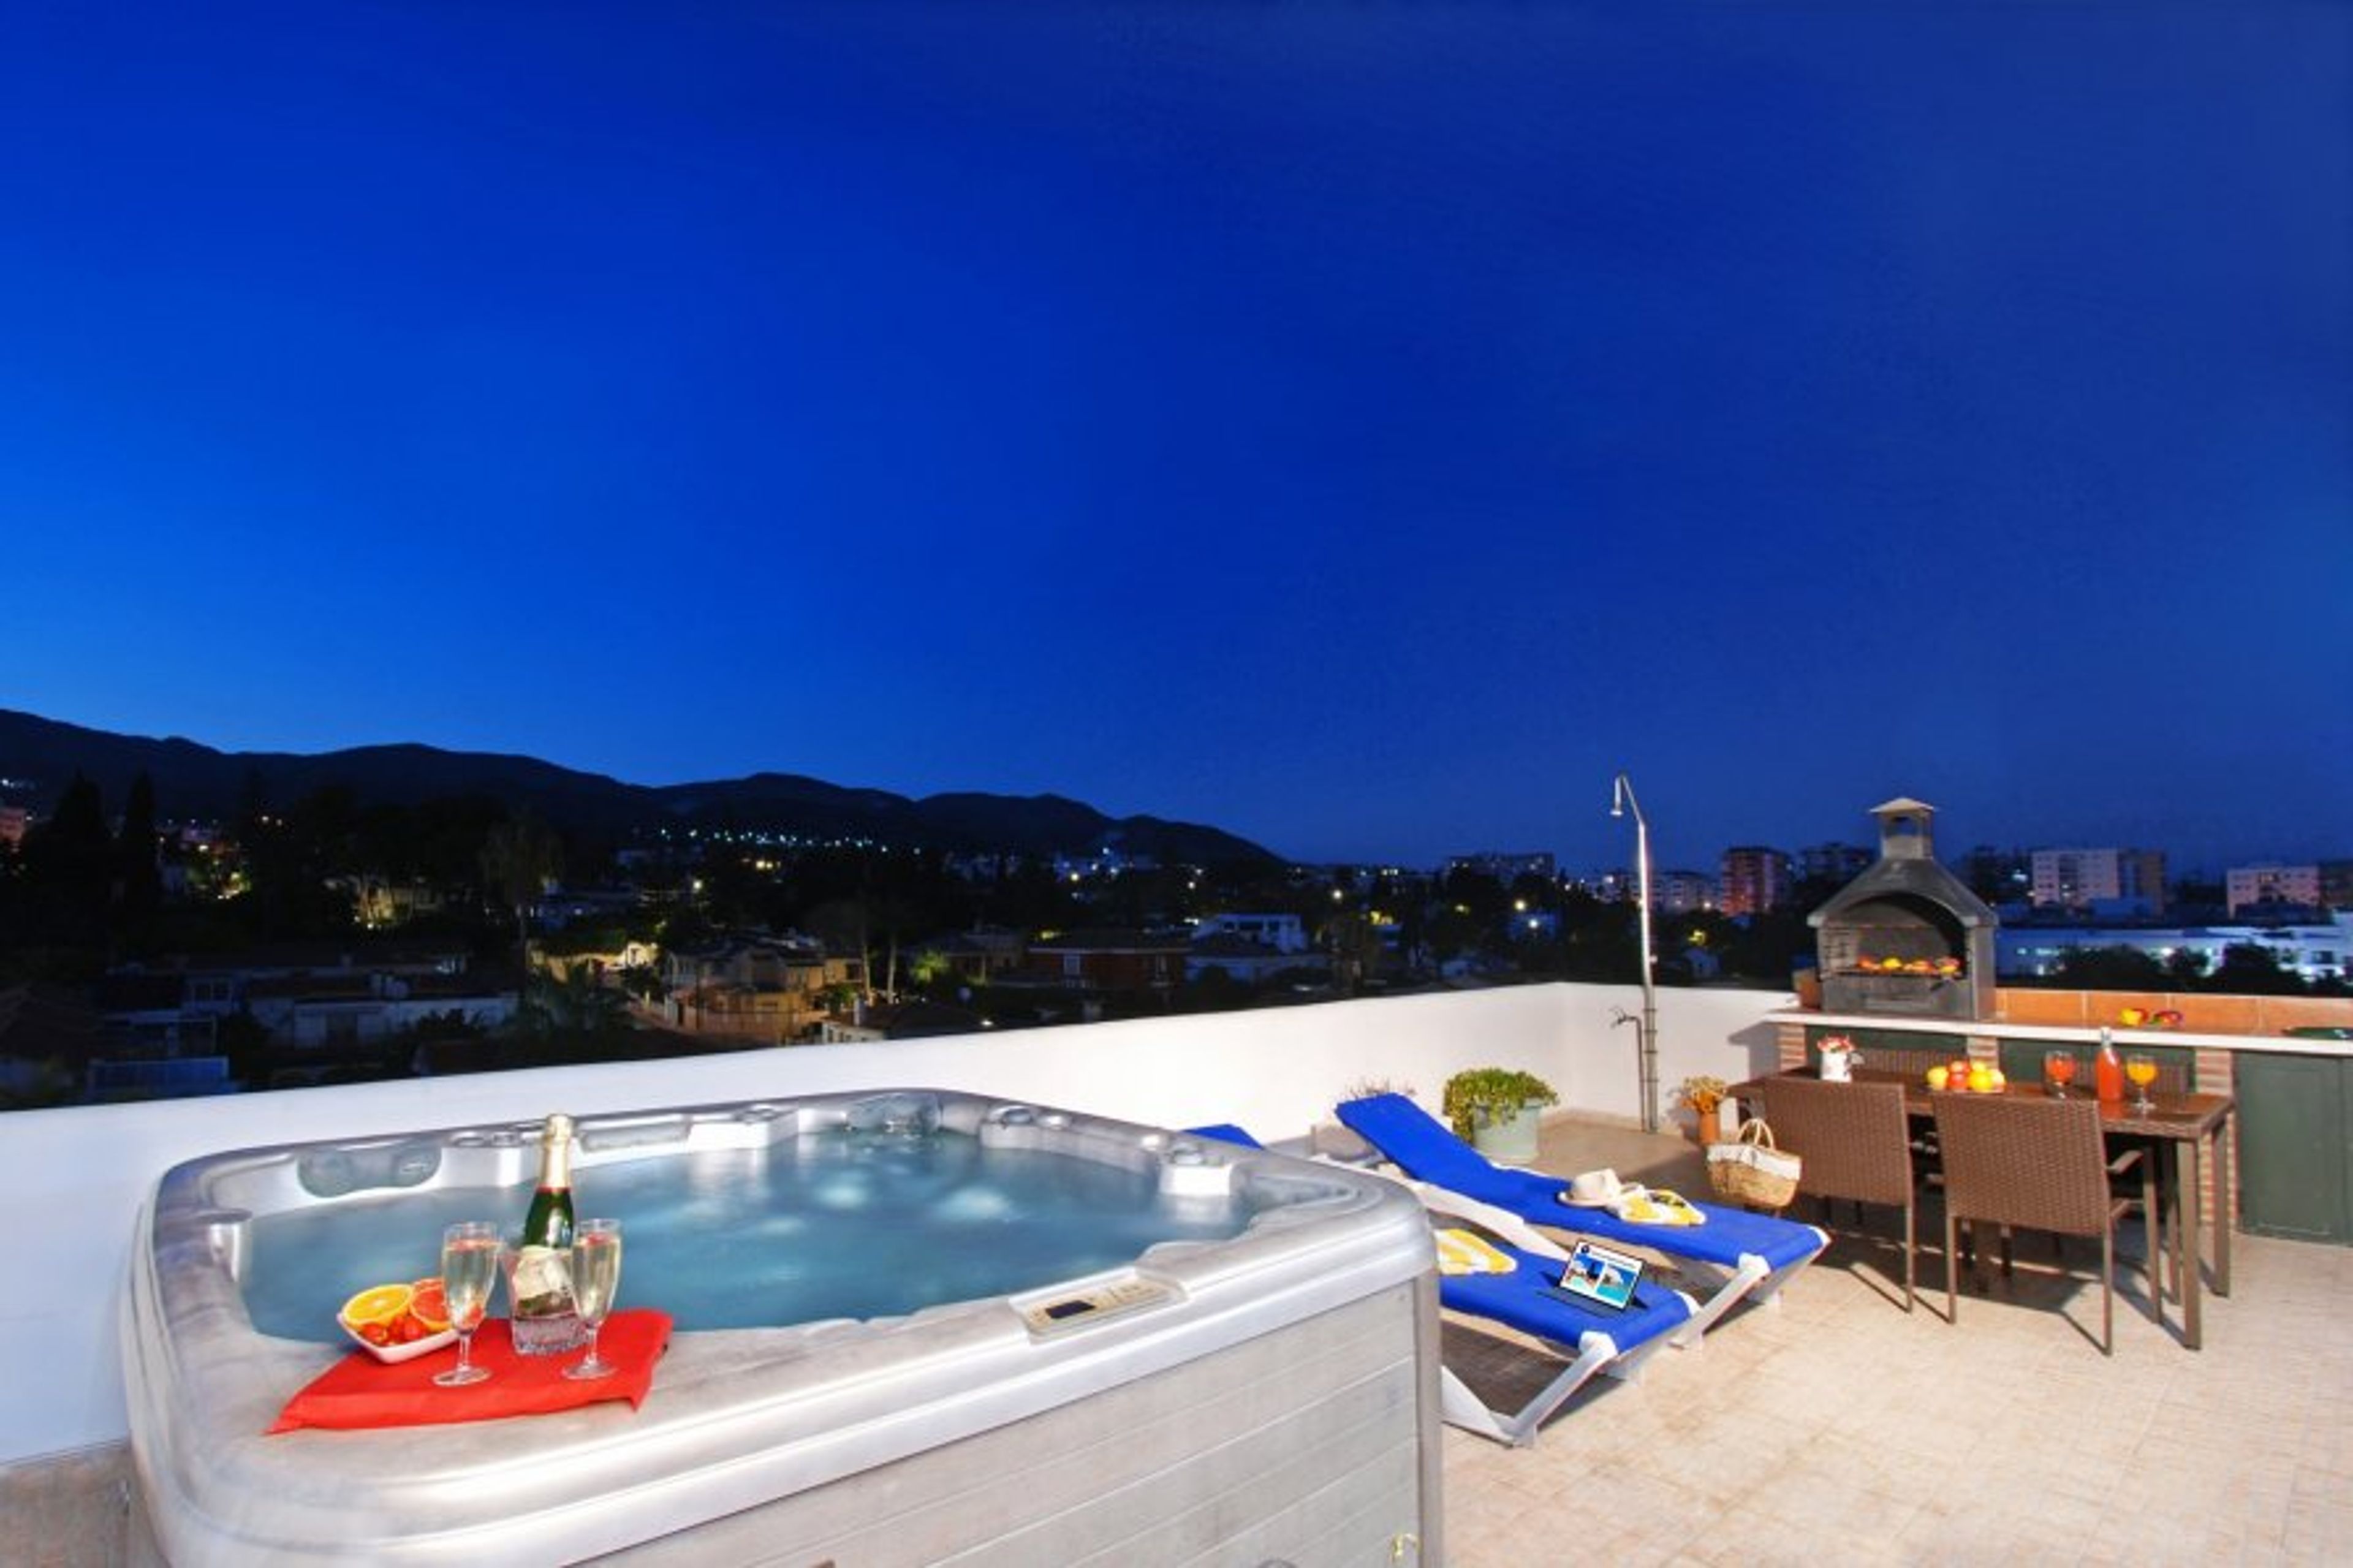 Enjoy the terrace and the jacuzzi at night!